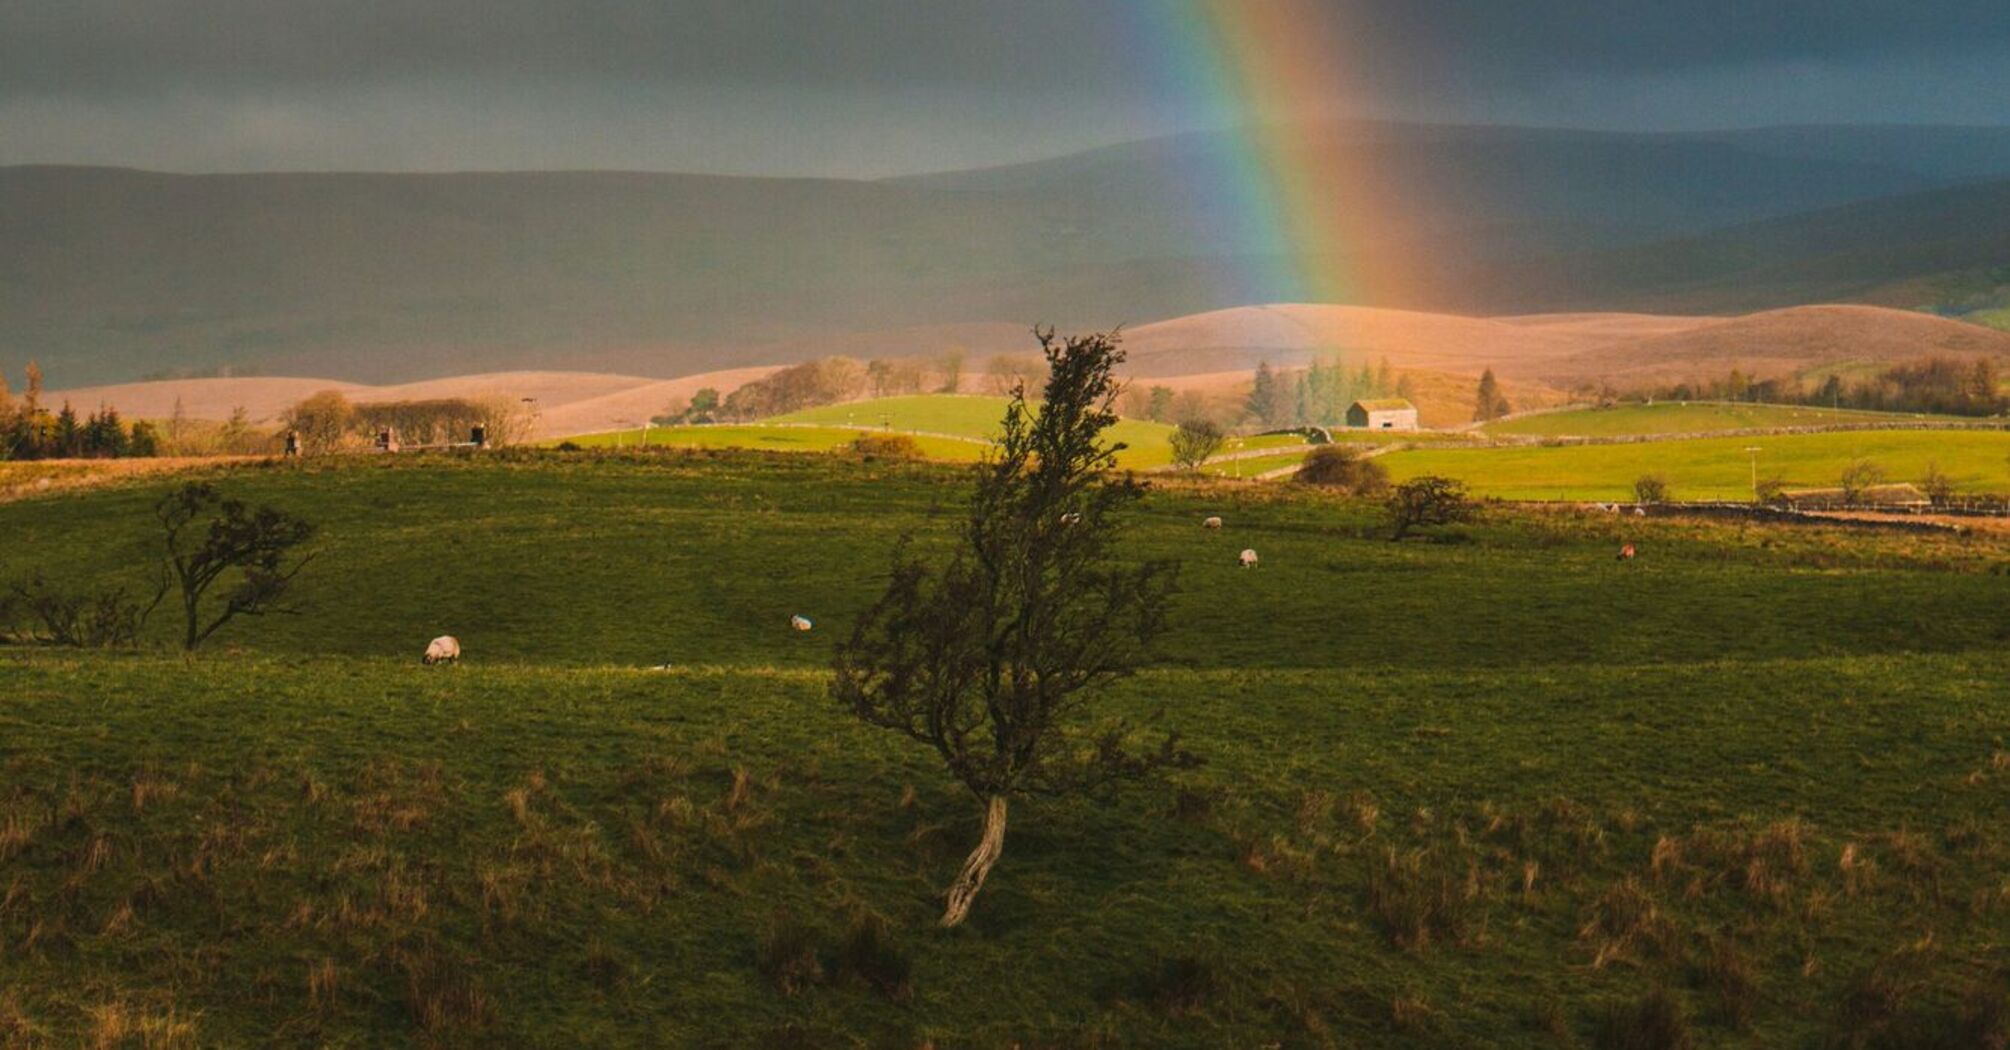 A vibrant rainbow arches over a lush green field with grazing sheep in the Yorkshire Dales, under a stormy sky